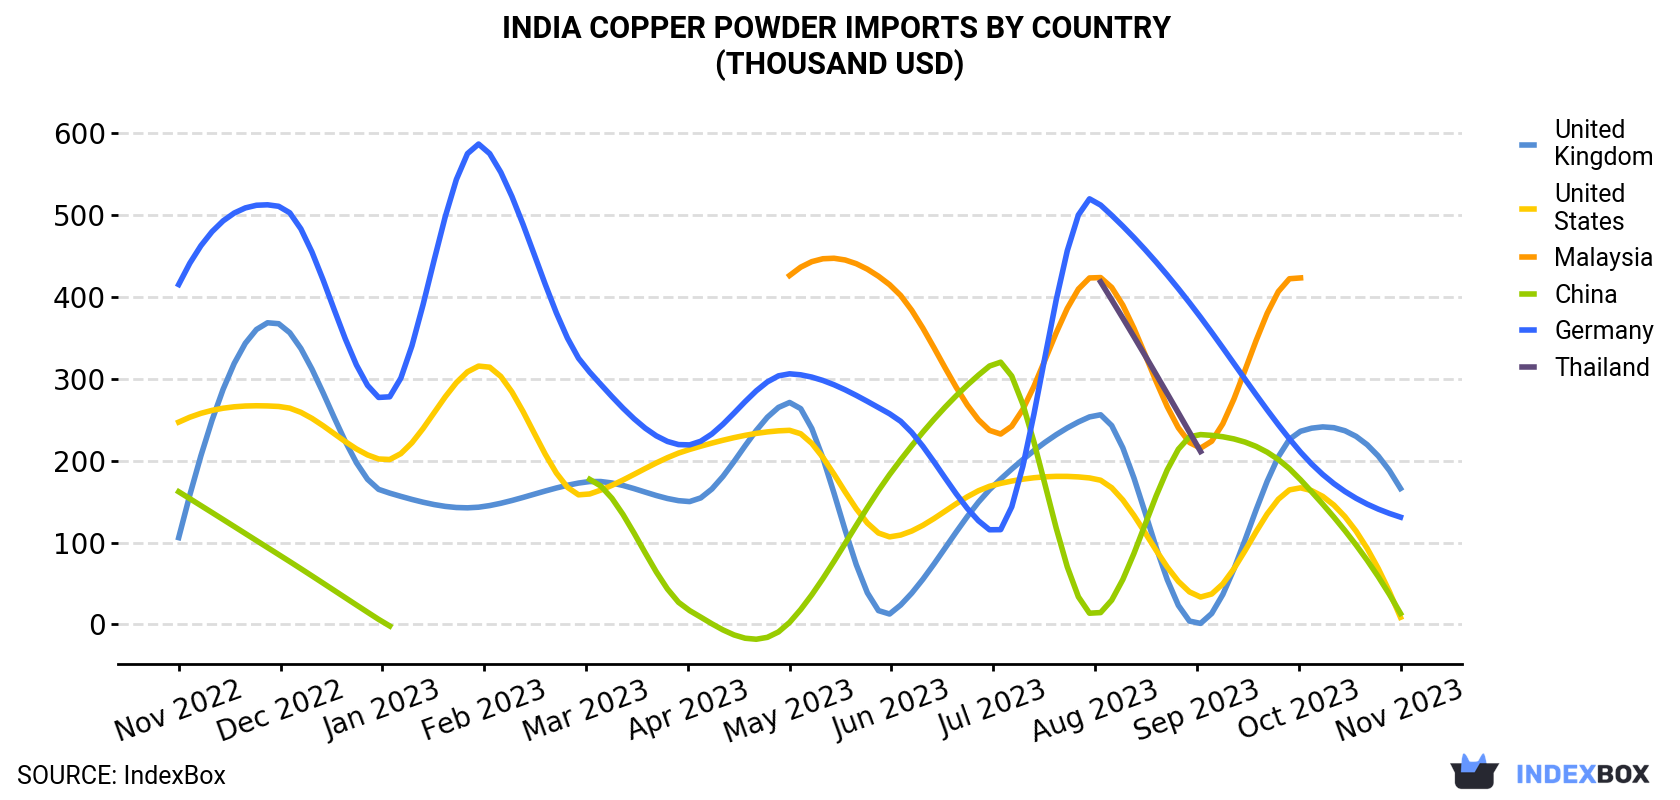 India Copper Powder Imports By Country (Thousand USD)